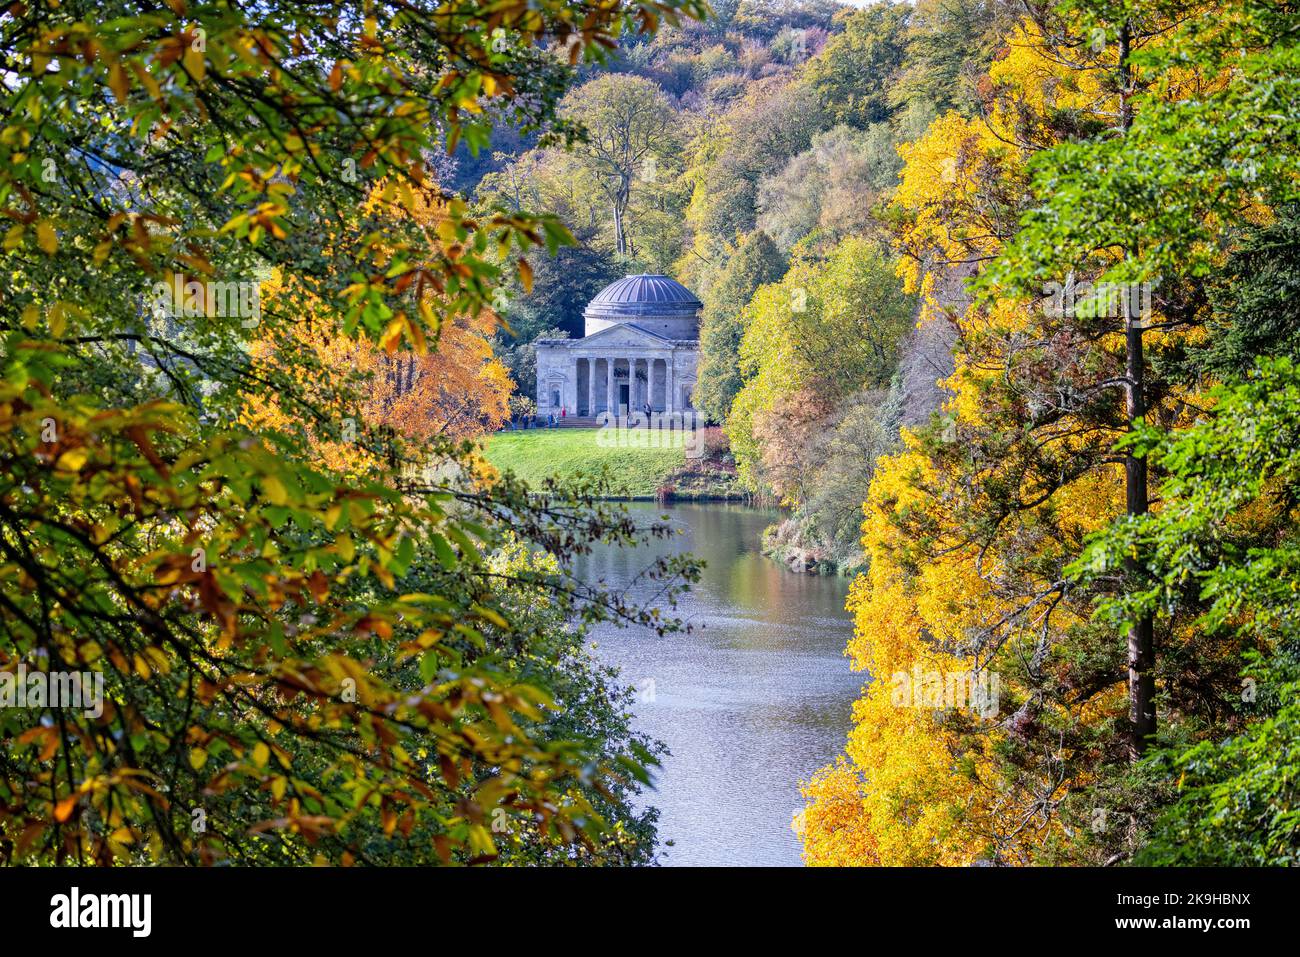 The Temple of Flora at Stourhead framed by trees and foliage in golden autumn colours at Stourton, Wiltshire, UK on 28 October 2022 Stock Photo